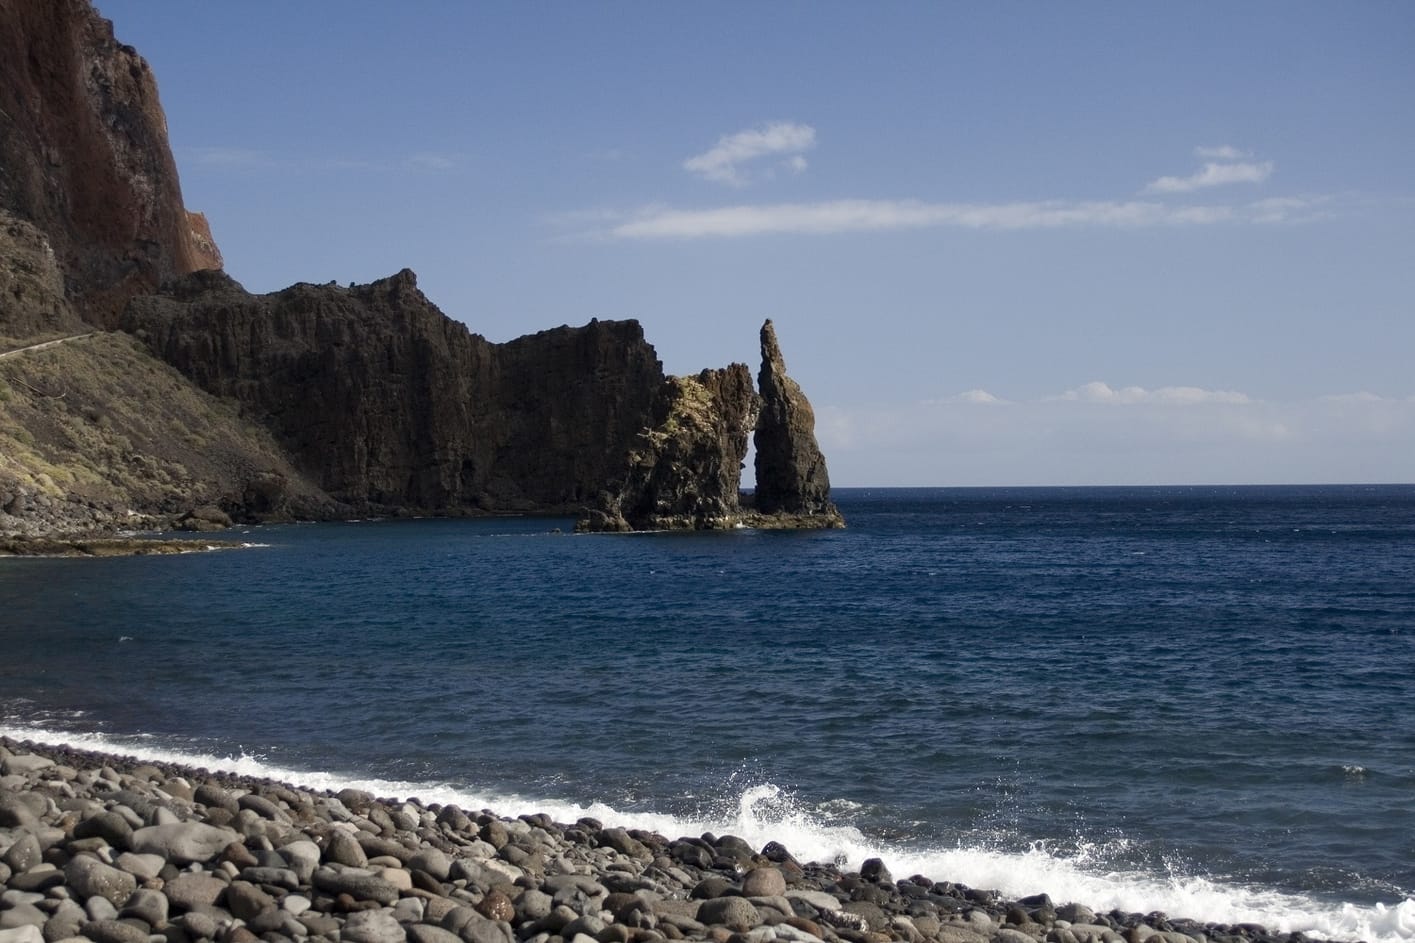 Price of ferry from Tenerife to El Hierro